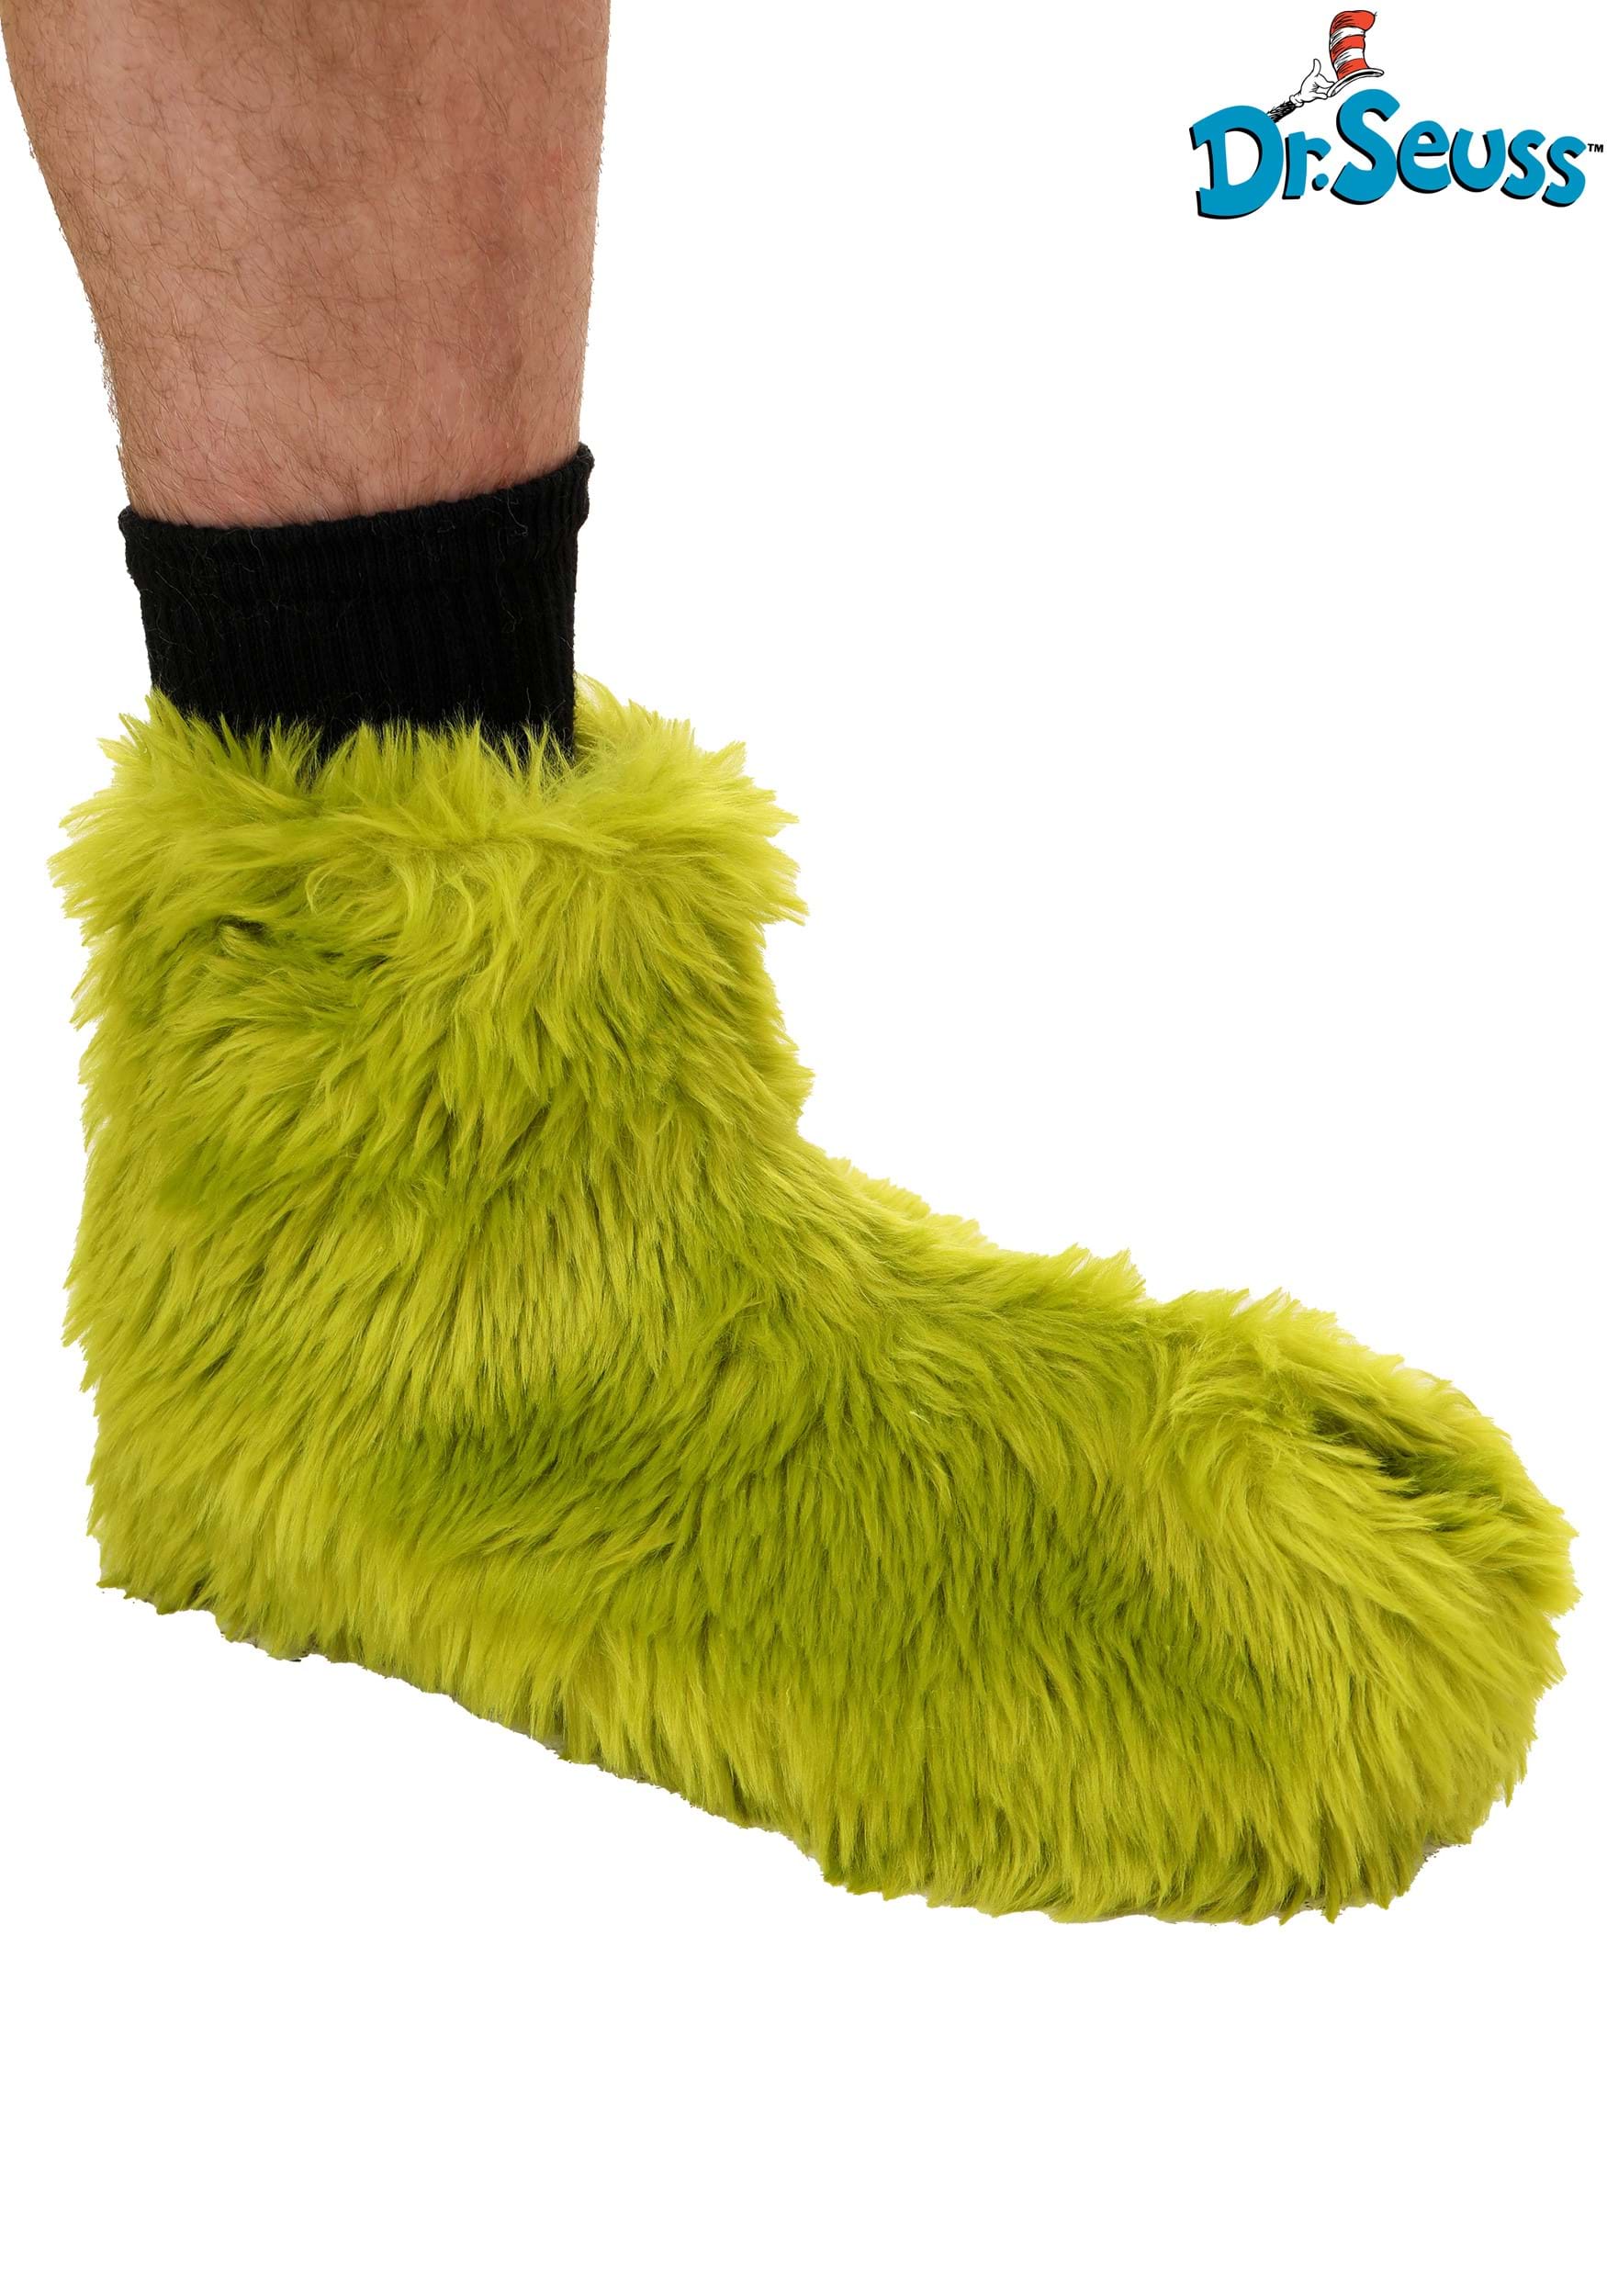 https://images.fun.com/products/75746/1-1/the-grinch-adult-feet.jpg